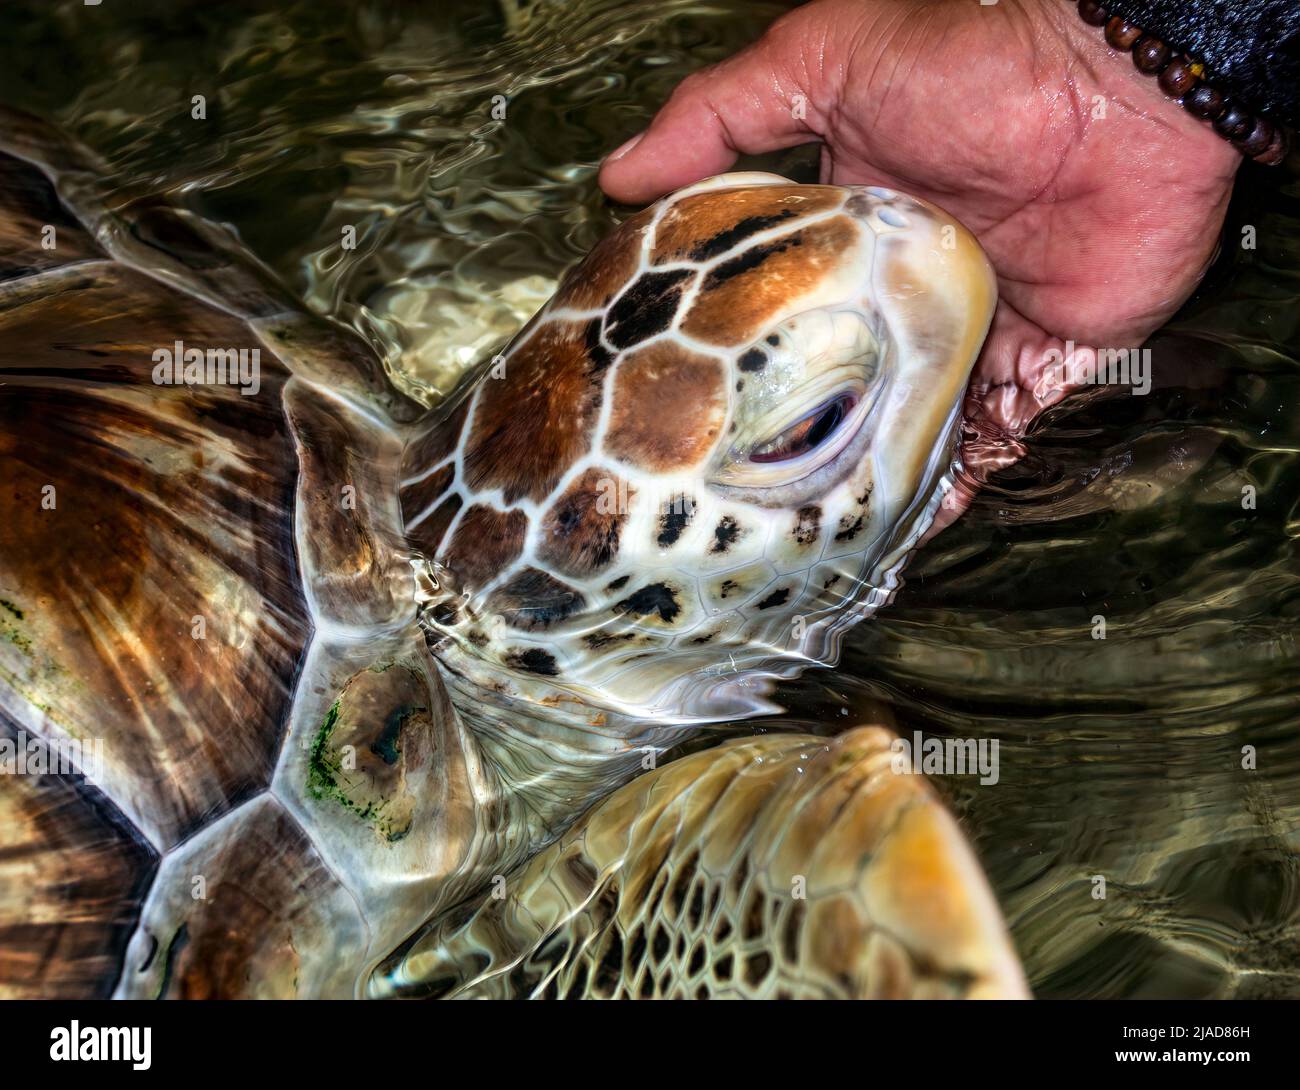 Person stroking a green sea turtle's head in ocean, Indonesia Stock Photo